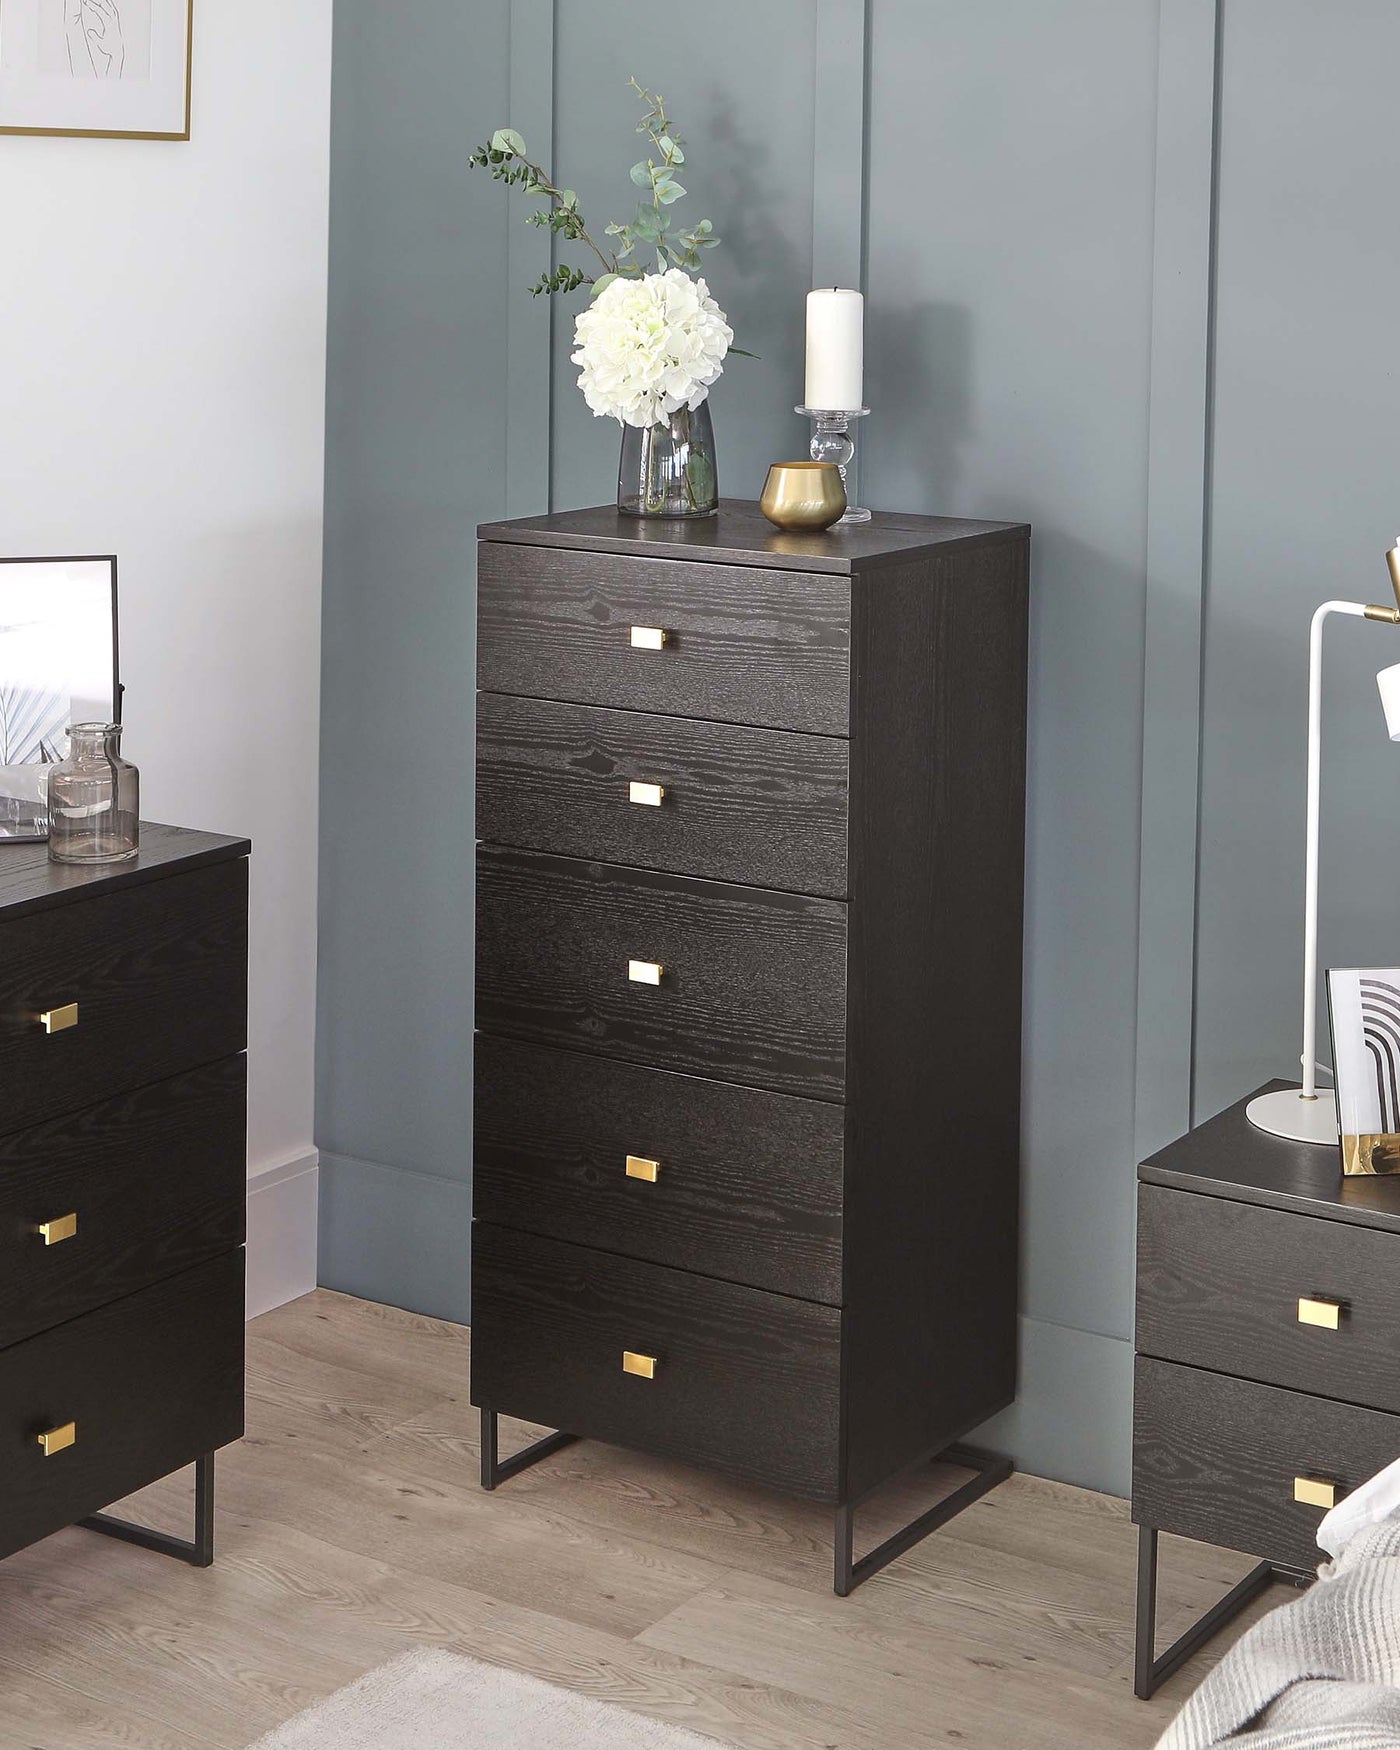 A collection of modern black wooden furniture featuring a tall 5-drawer chest and a shorter 3-drawer chest, both with gold-coloured metal handles and sleek, black metal legs. The furniture demonstrates a simple yet elegant design suitable for contemporary bedroom decor.